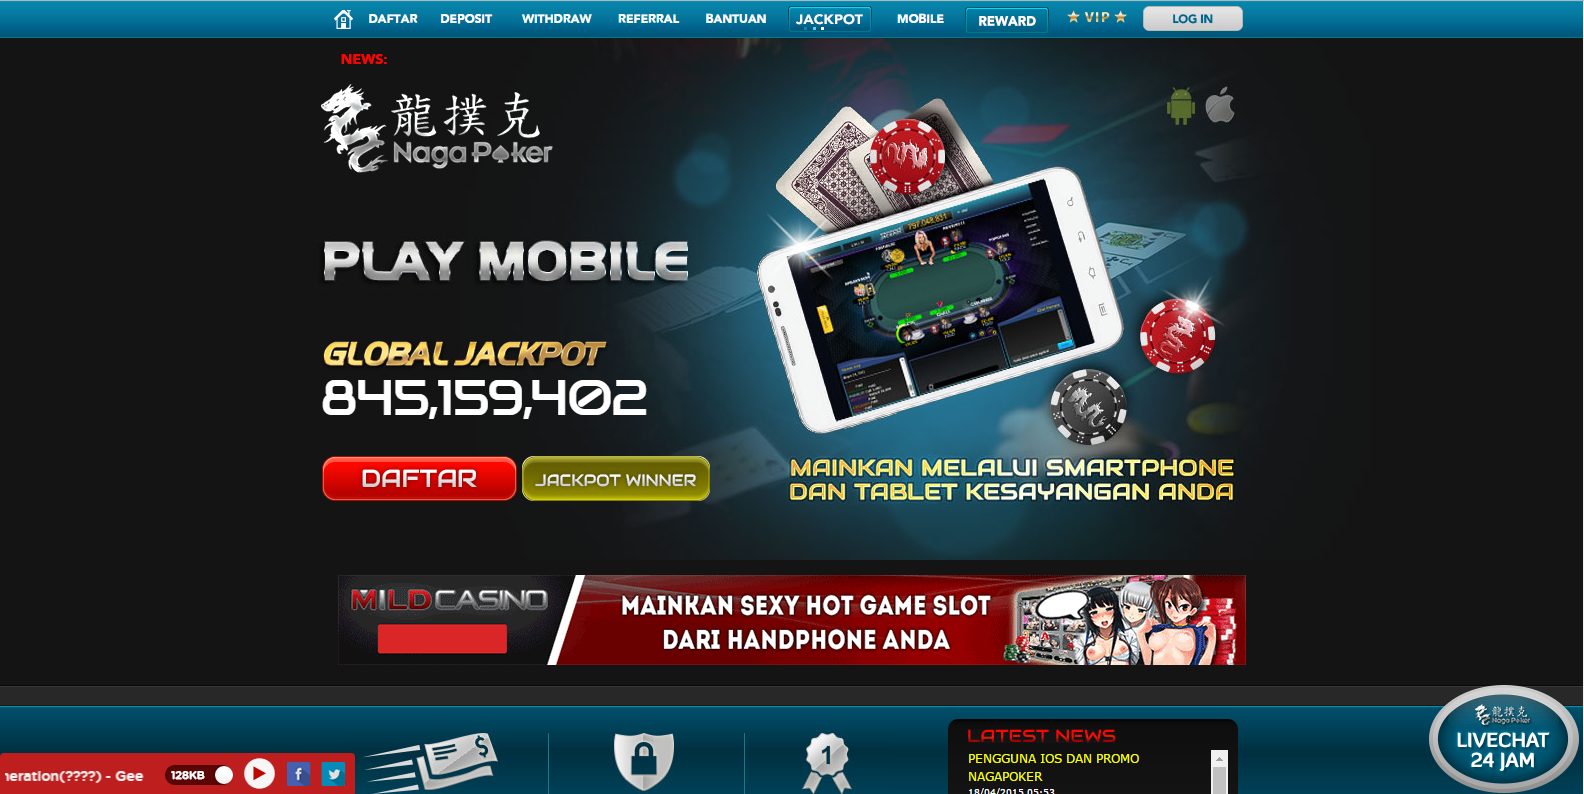 Mobile Poker Apps Outplay Apple by Getting Illicit Games Into the App Store